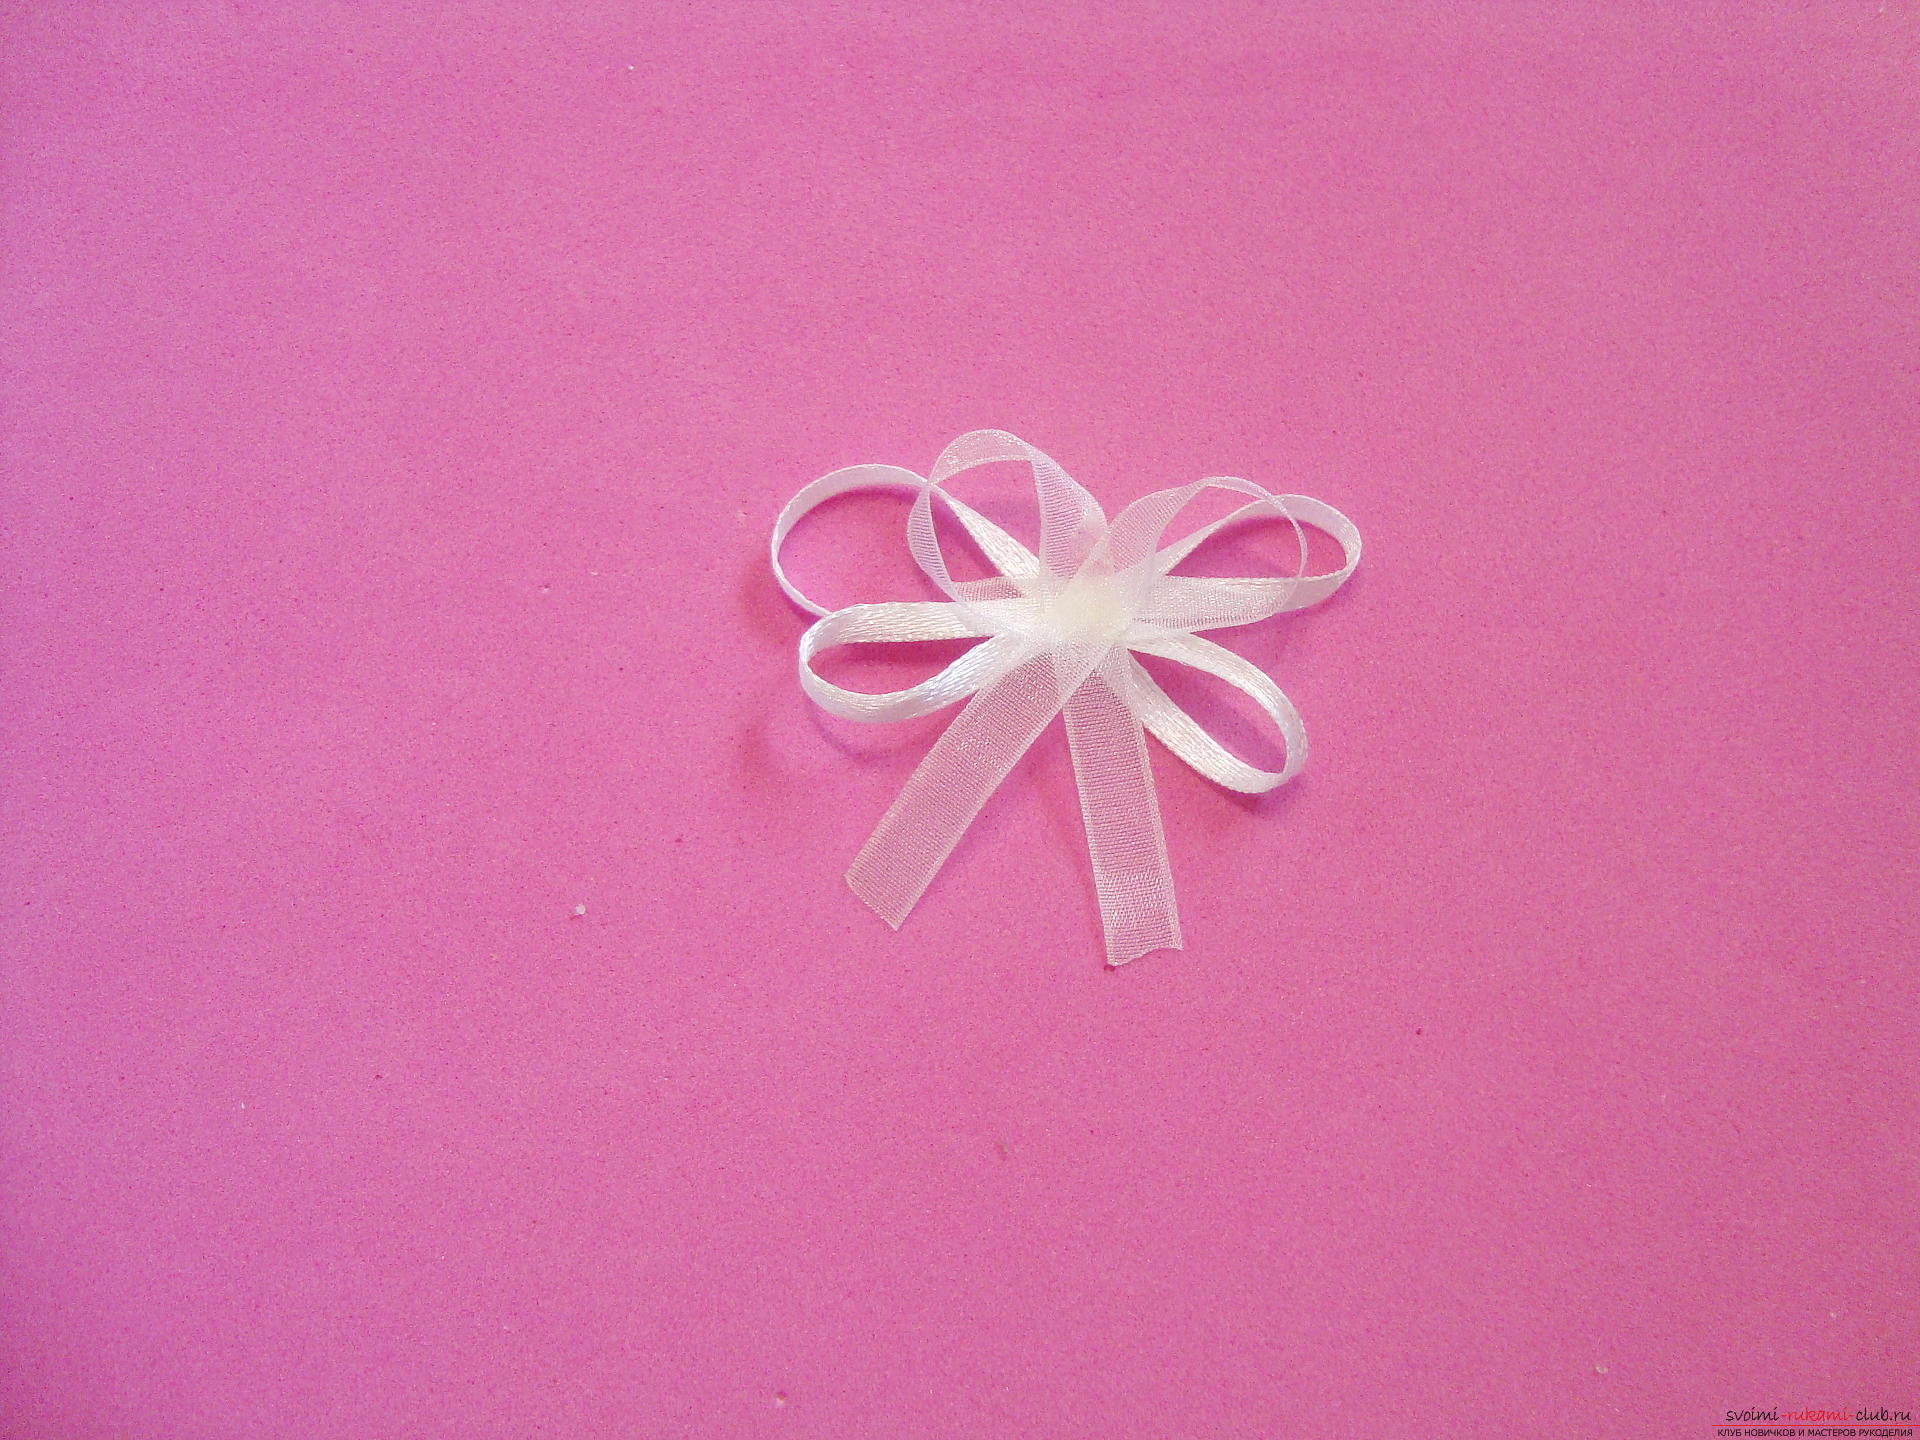 Step-by-step guide to making bows by September 1 for schoolgirls describing the steps and photos. Photo Number 18